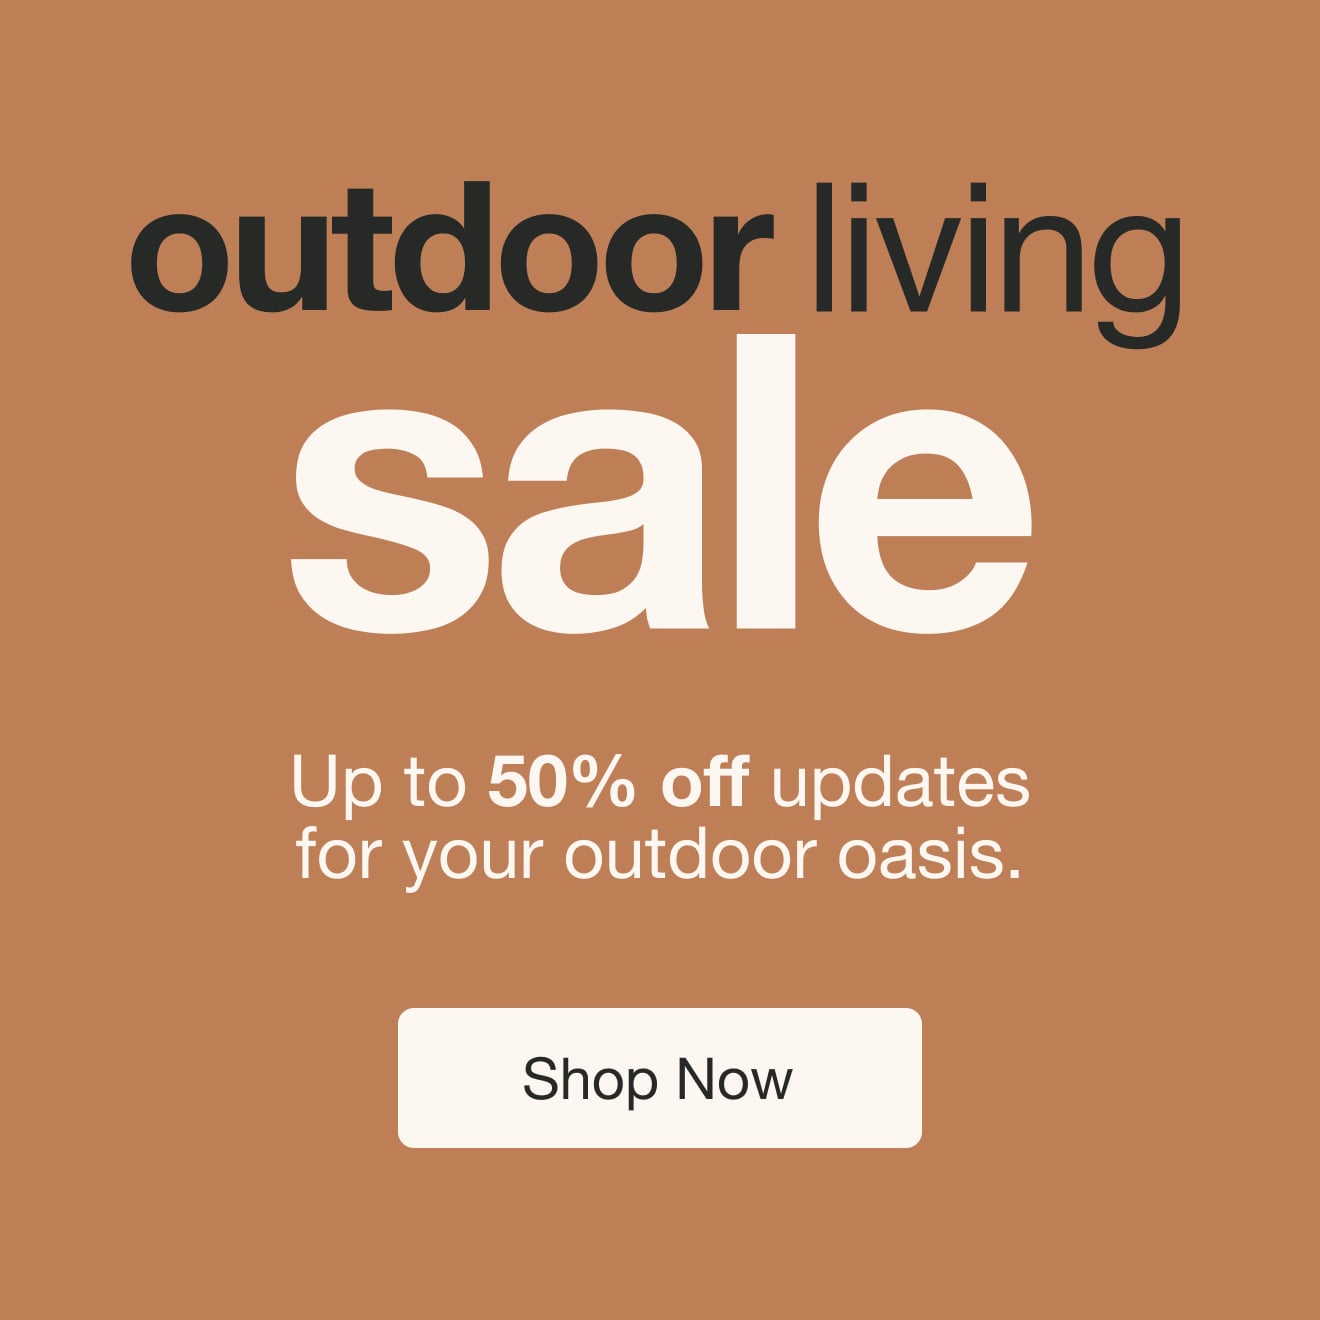 Outdoor Living Event — Shop Now!